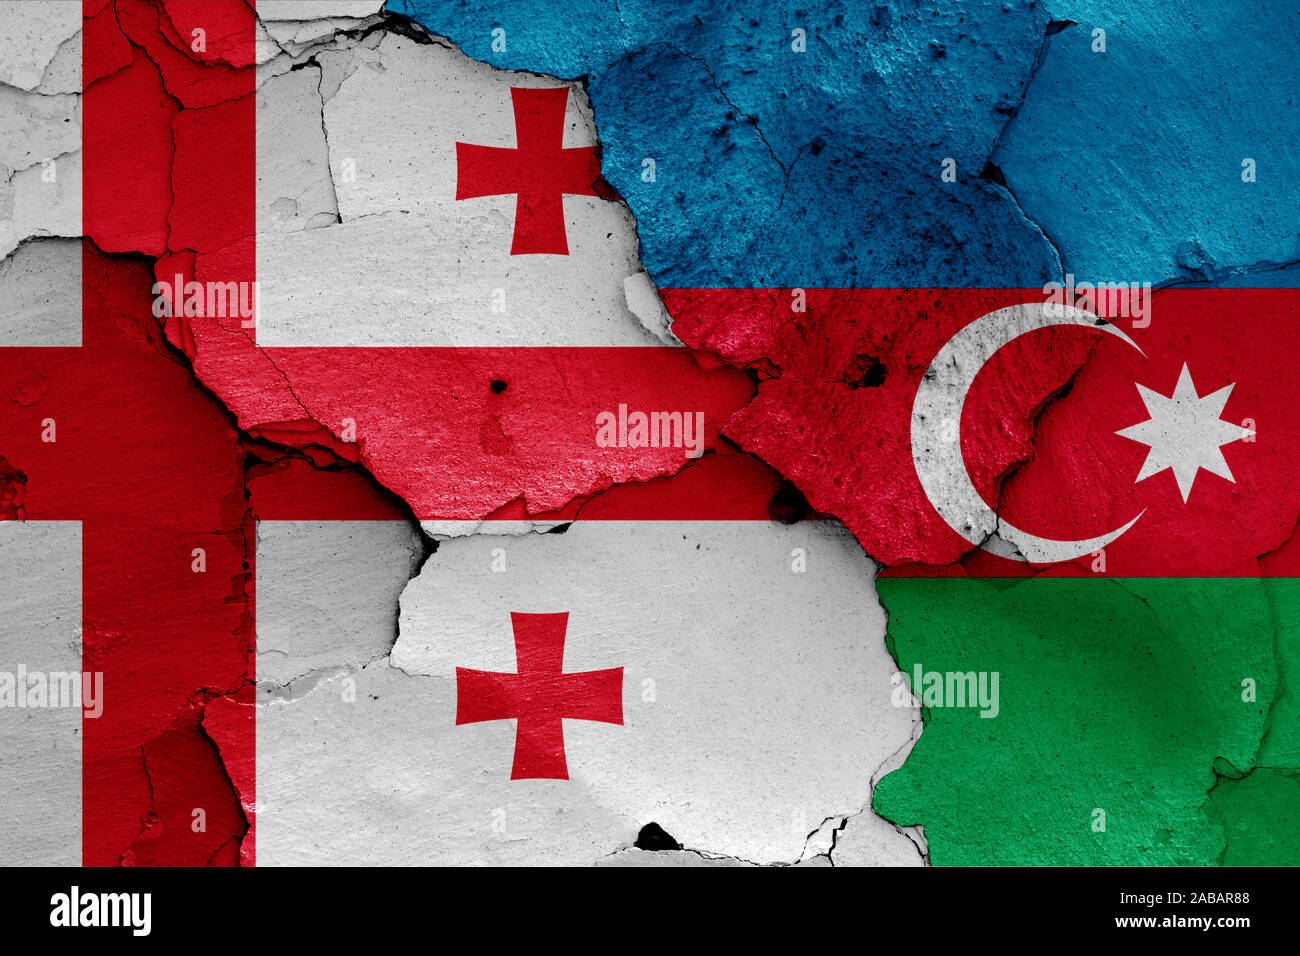 flags of Georgia and Azerbaijan painted on cracked wall Stock Photo